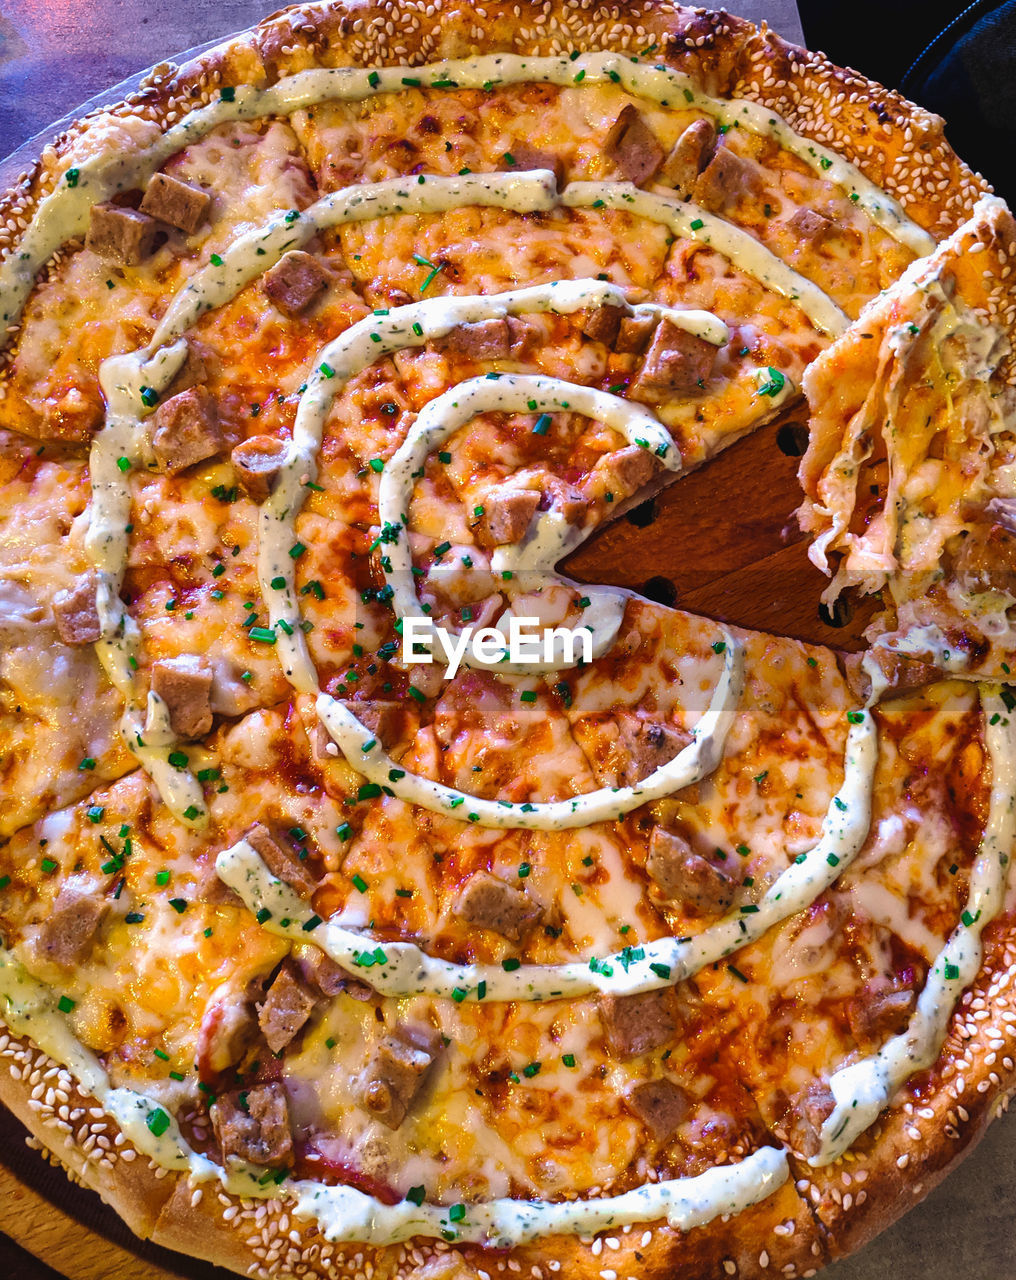 HIGH ANGLE VIEW OF PIZZA ON TABLE